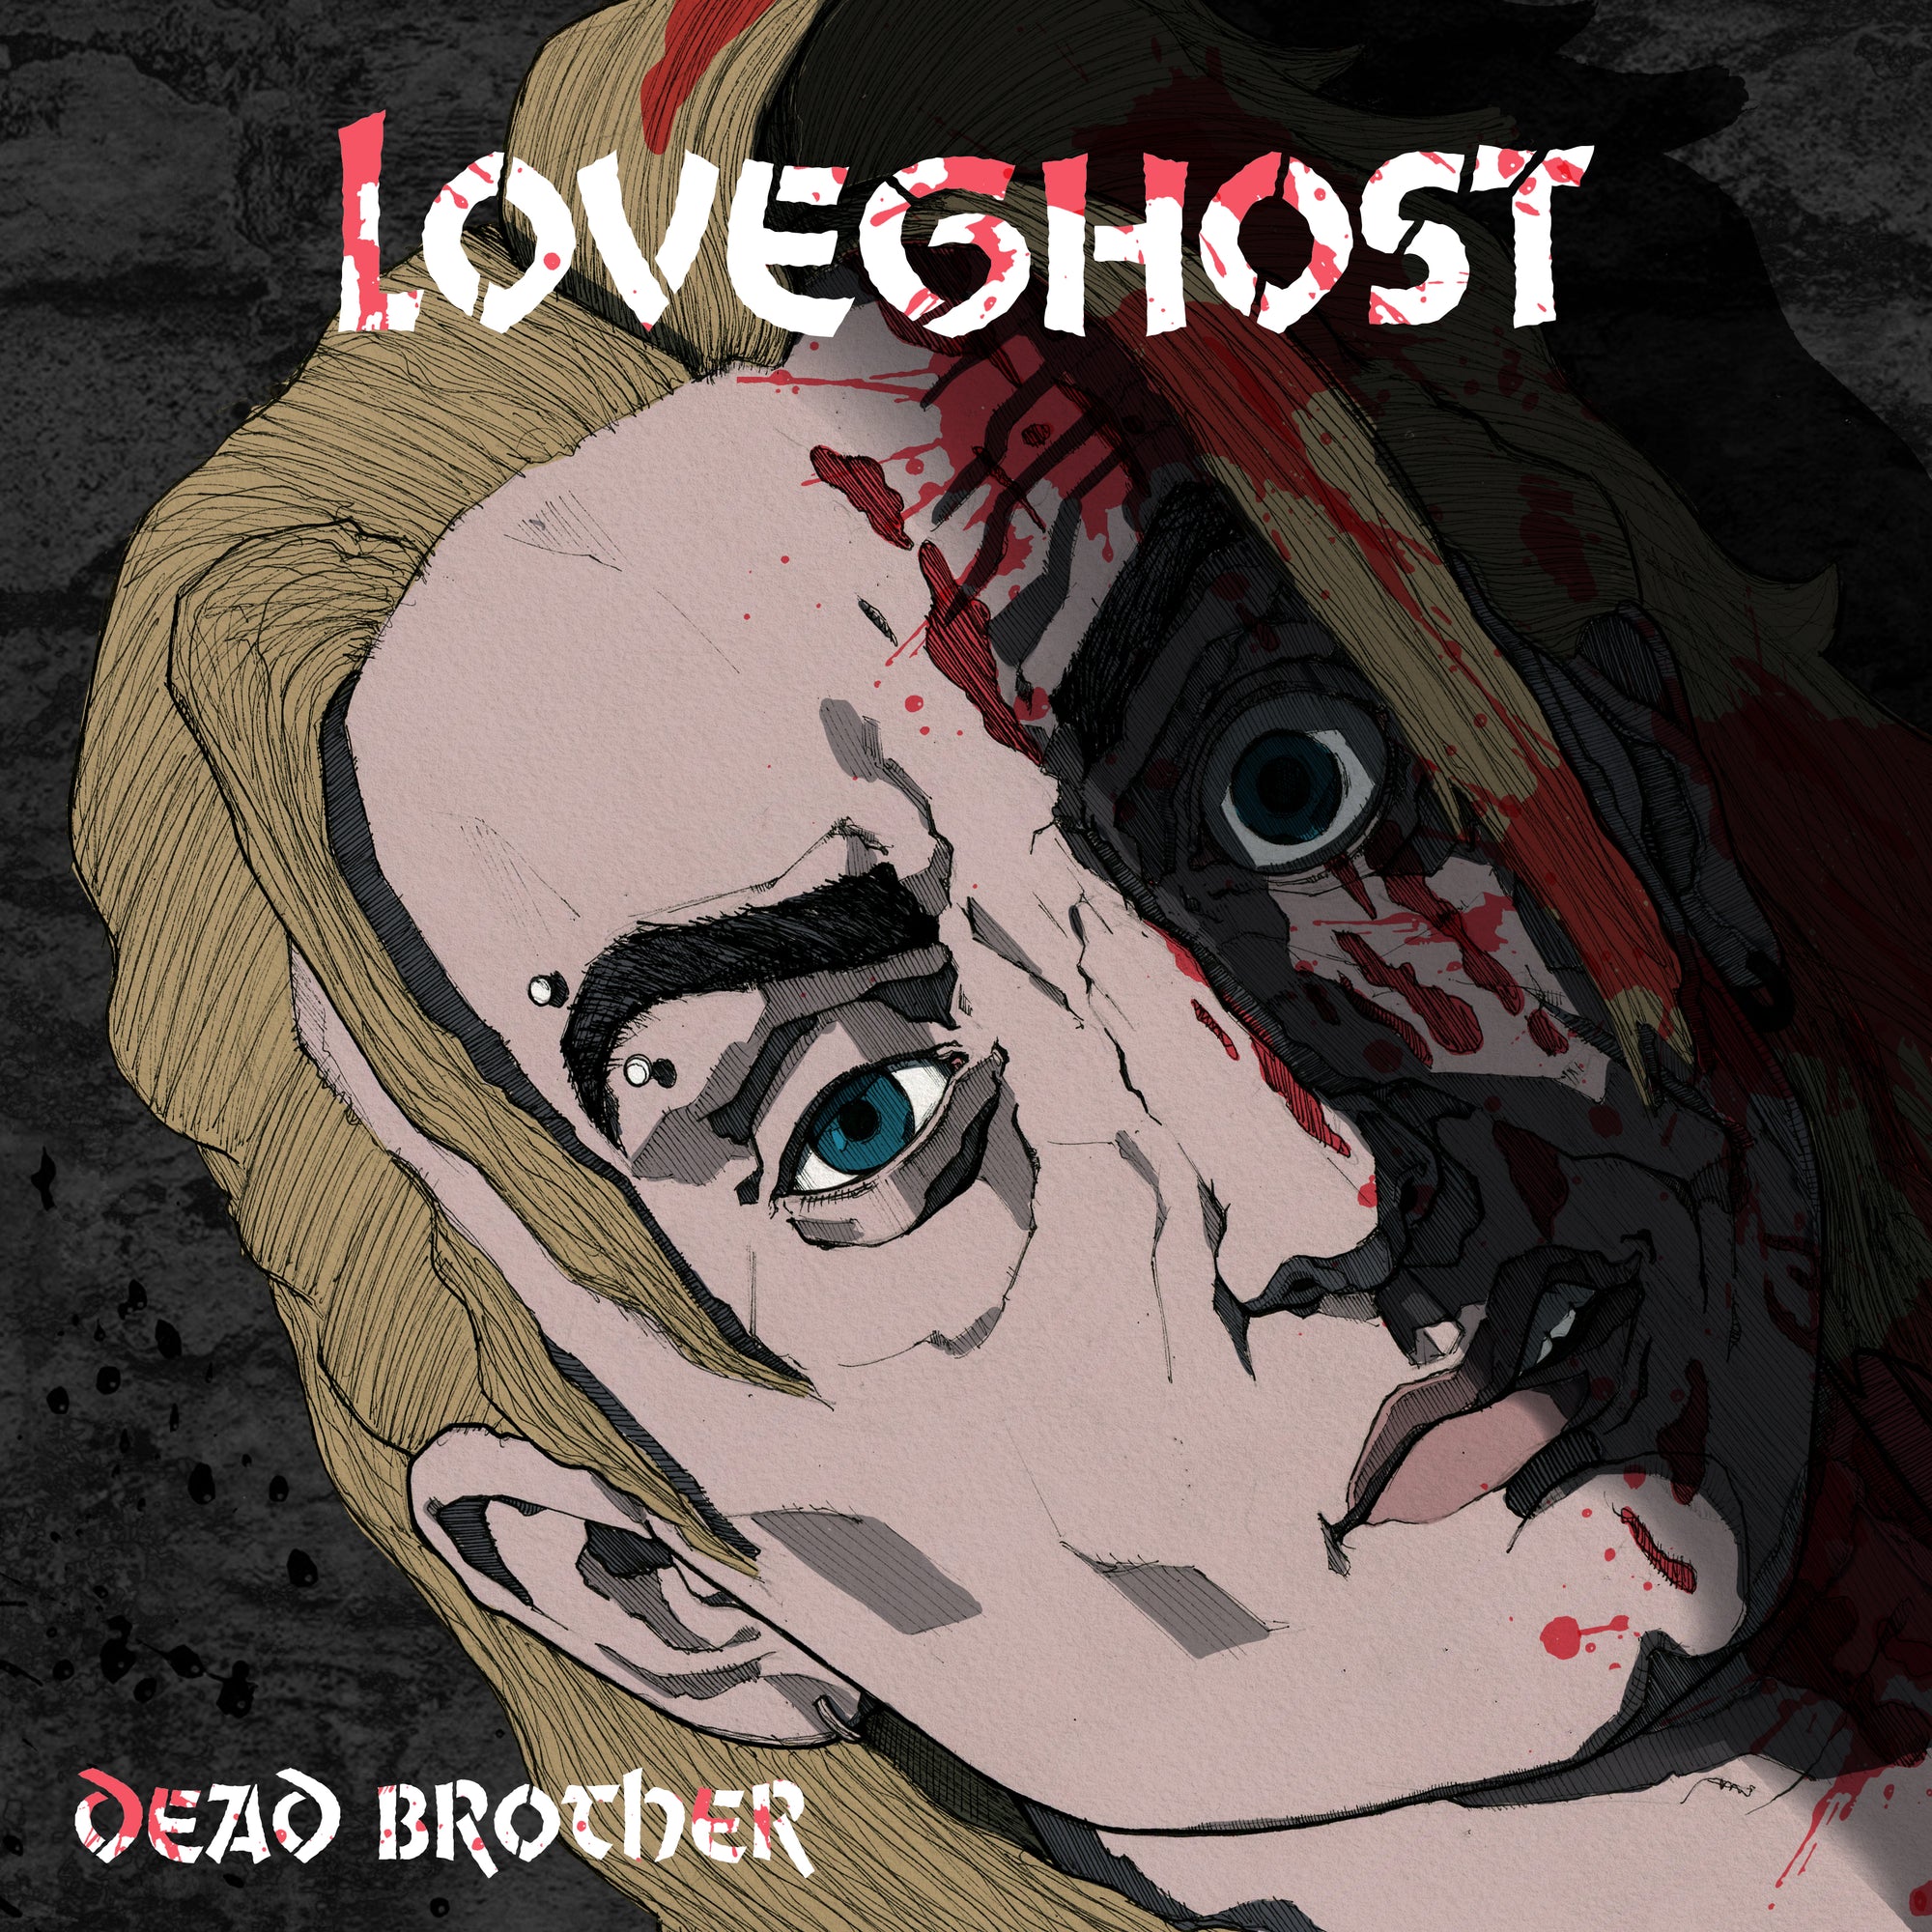 Love Ghost – ‘Dead Brother’